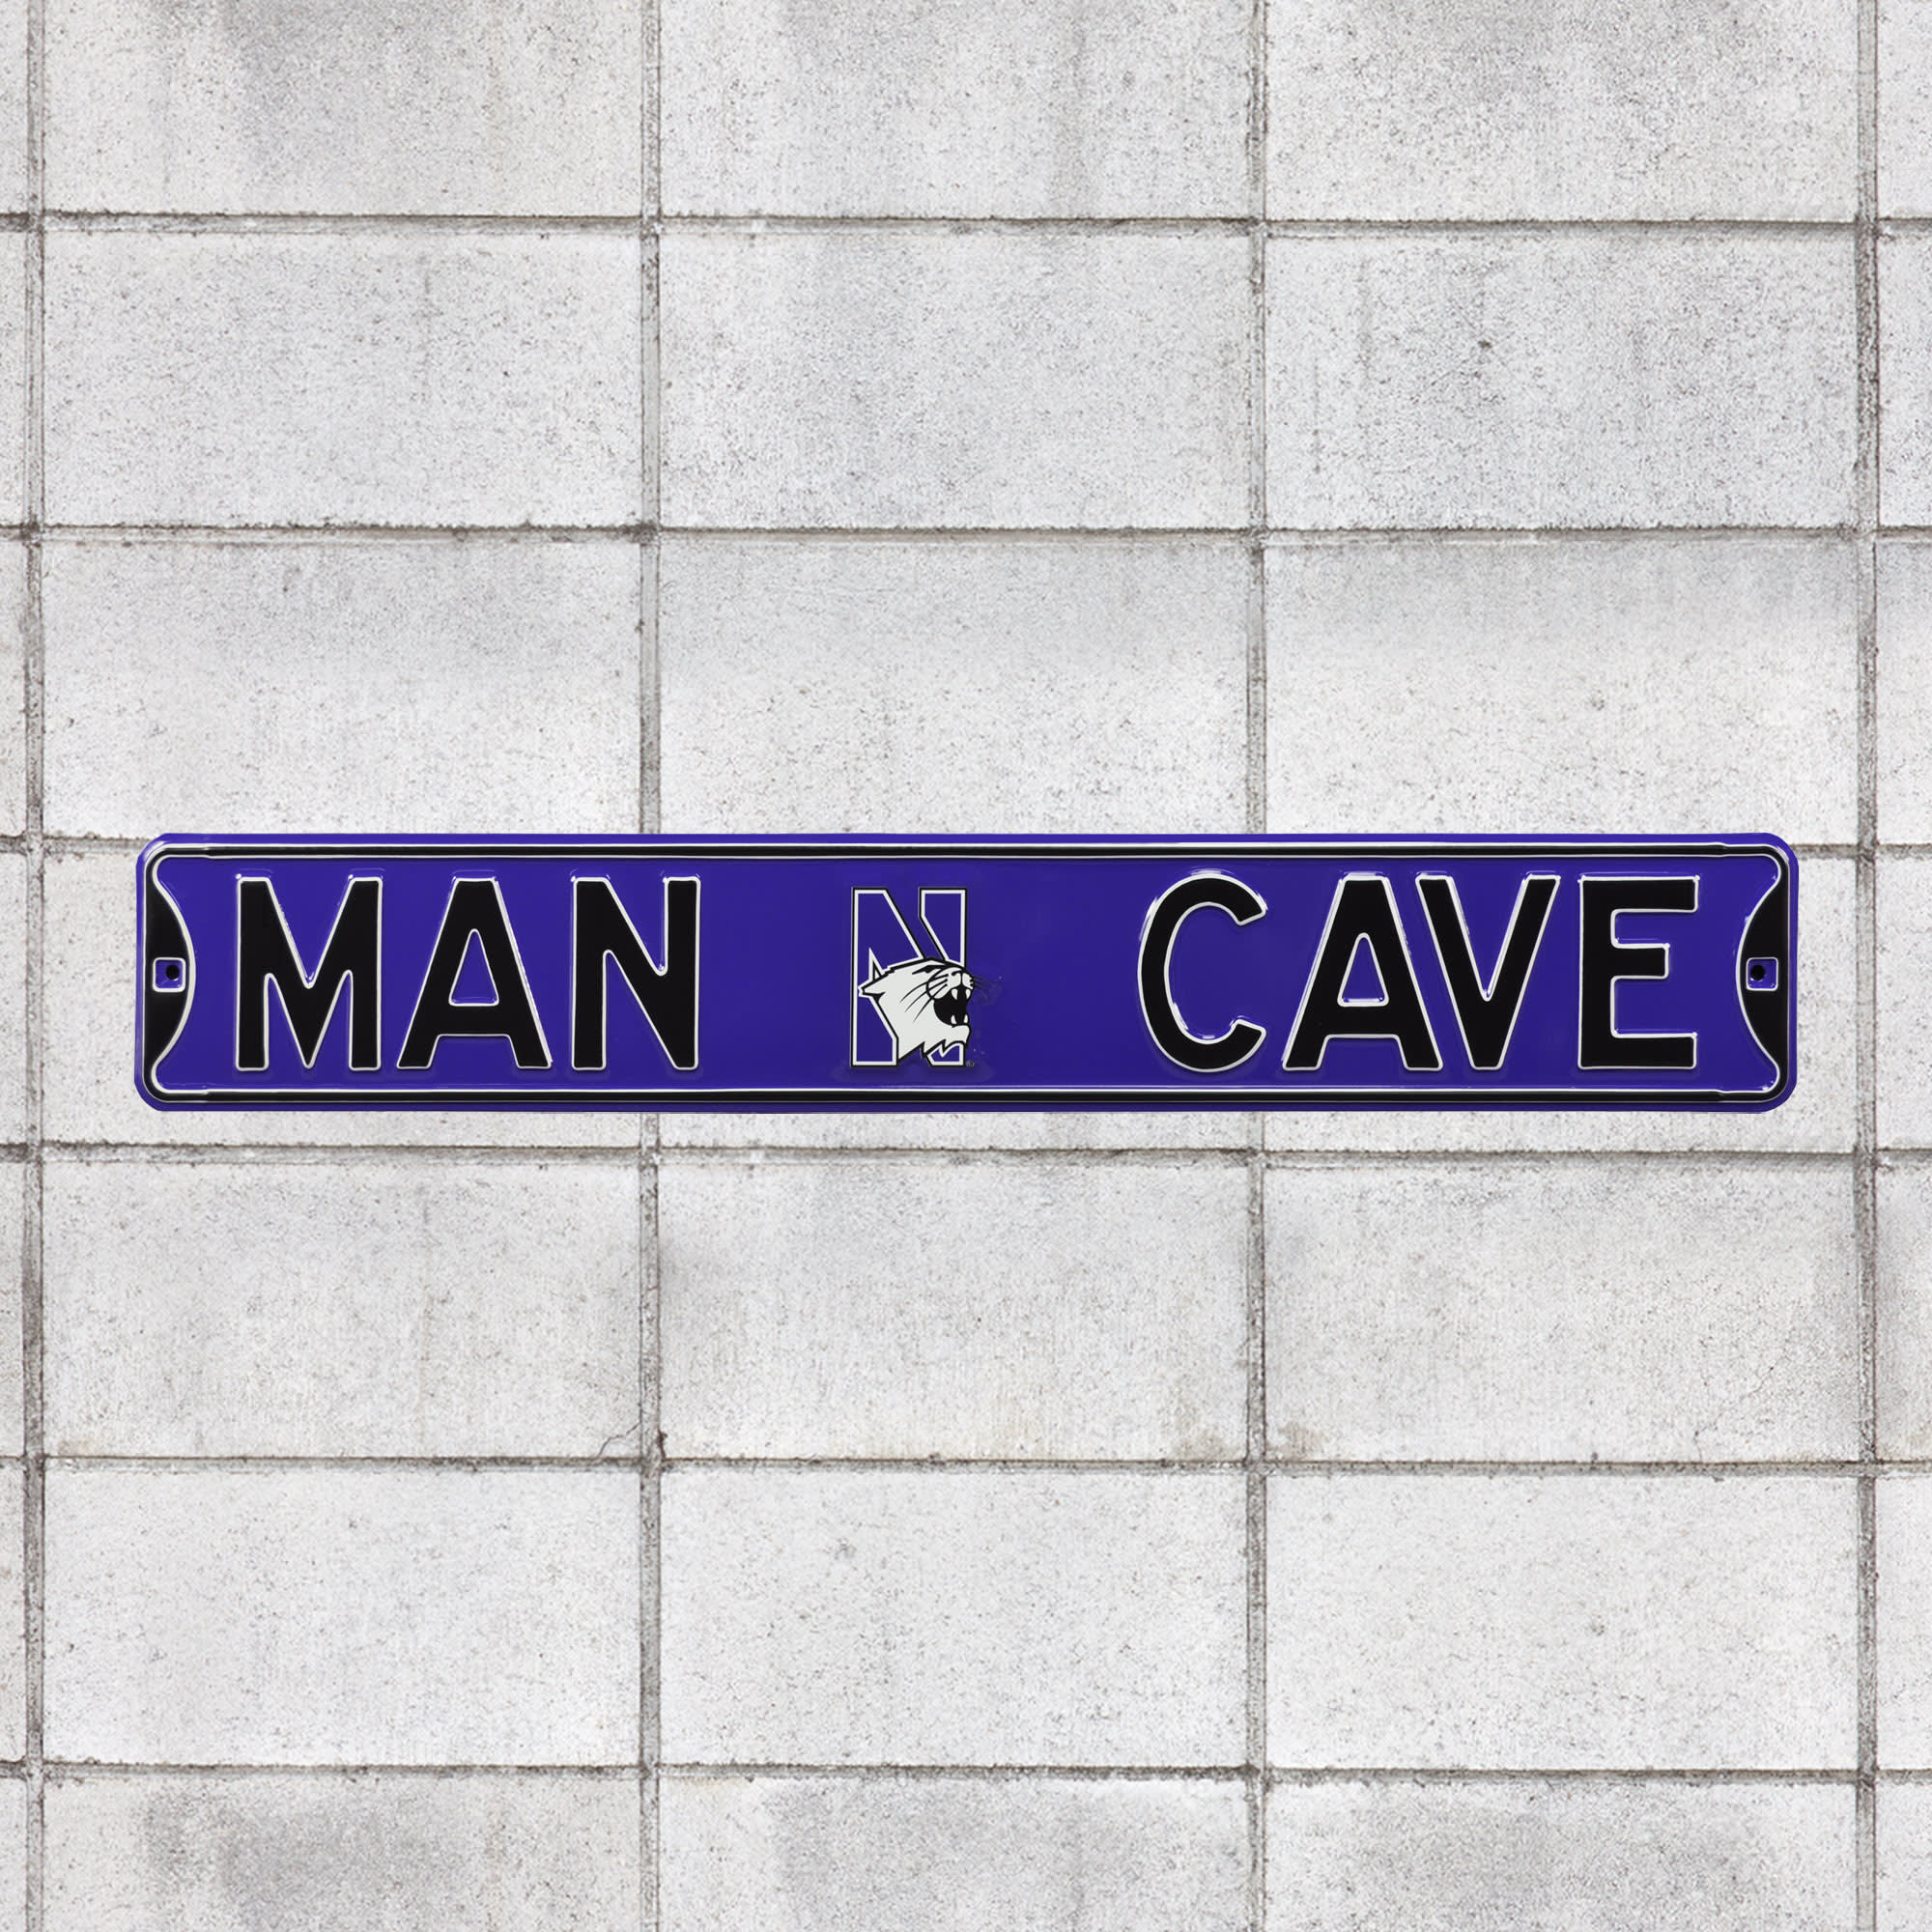 Northwestern Wildcats: Man Cave - Officially Licensed Metal Street Sign 36.0"W x 6.0"H by Fathead | 100% Steel